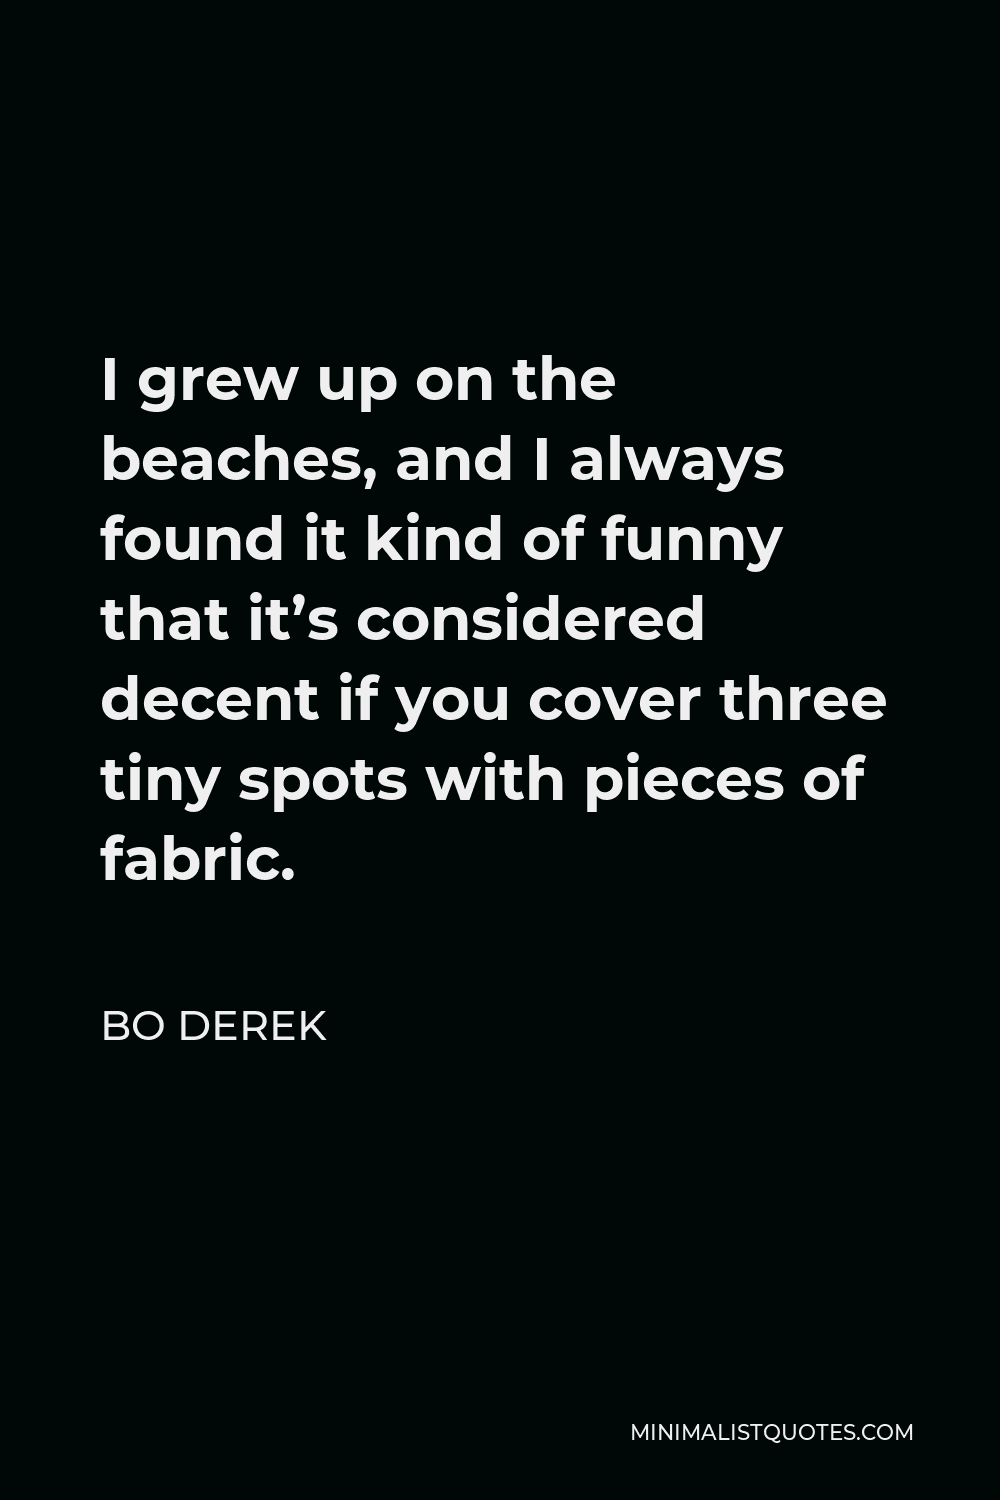 Bo Derek Quote - I grew up on the beaches, and I always found it kind of funny that it’s considered decent if you cover three tiny spots with pieces of fabric.